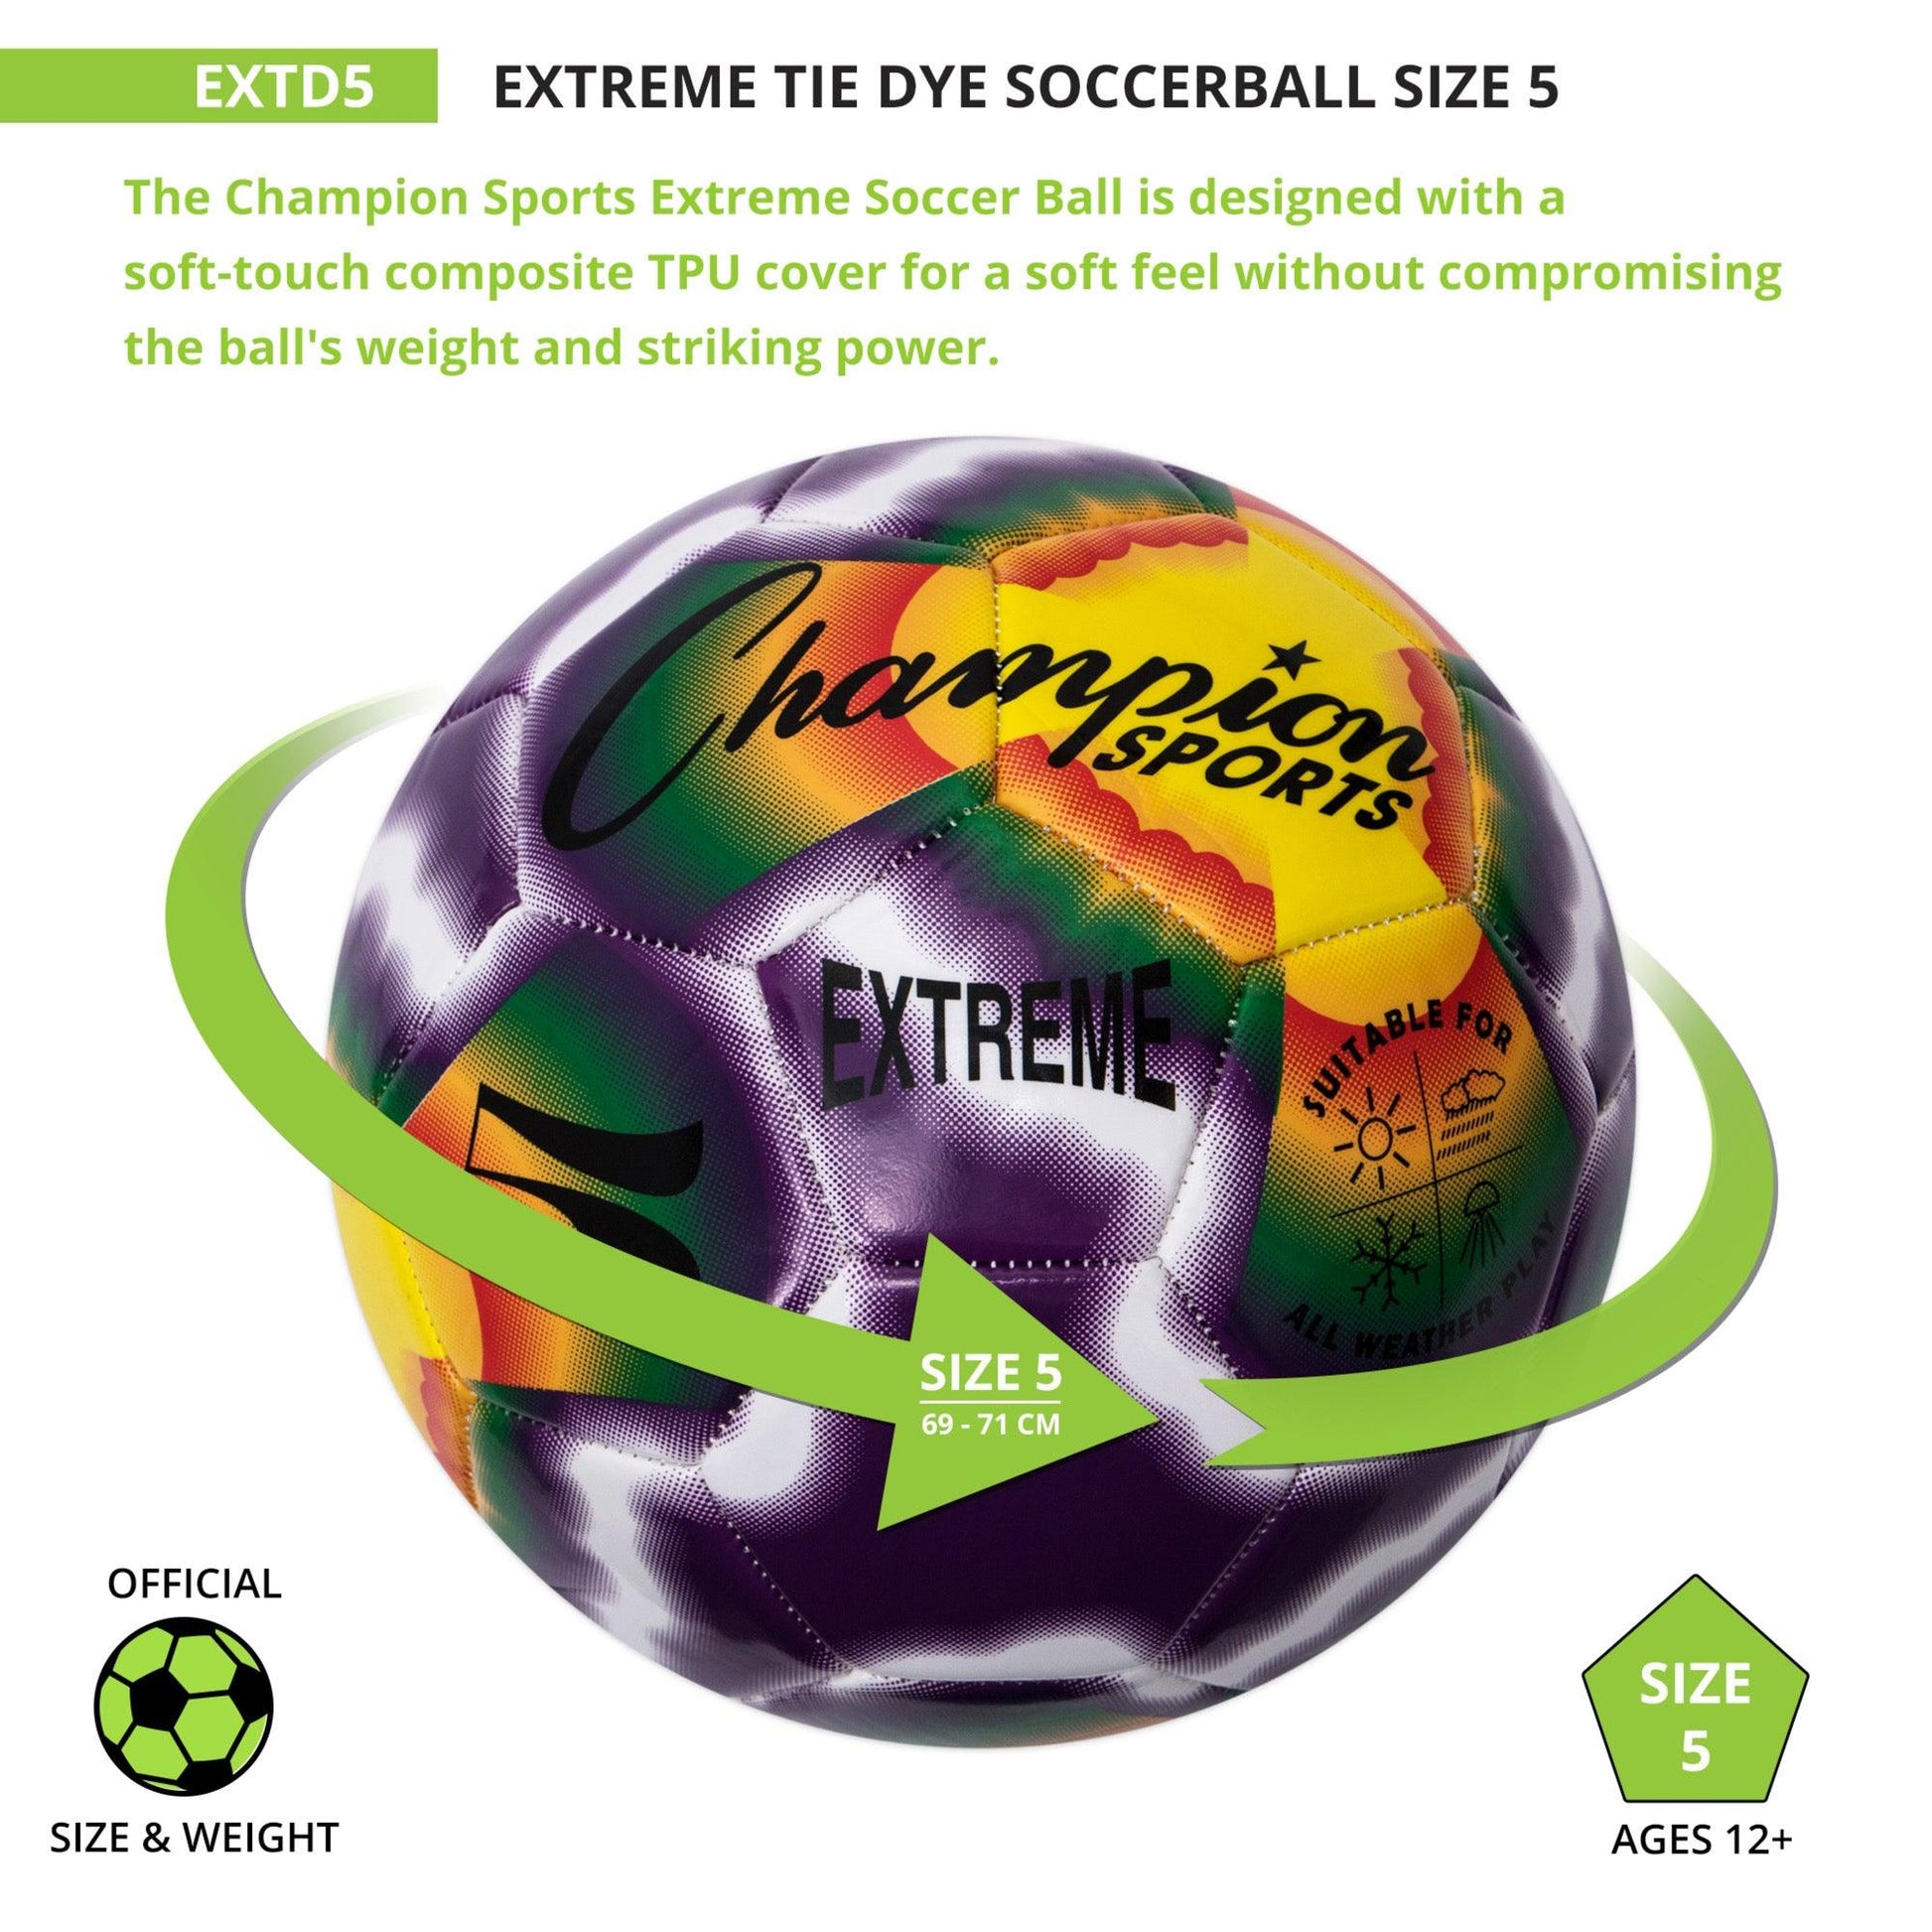 Extreme Tiedye Soccerball, Size 5 - Loomini